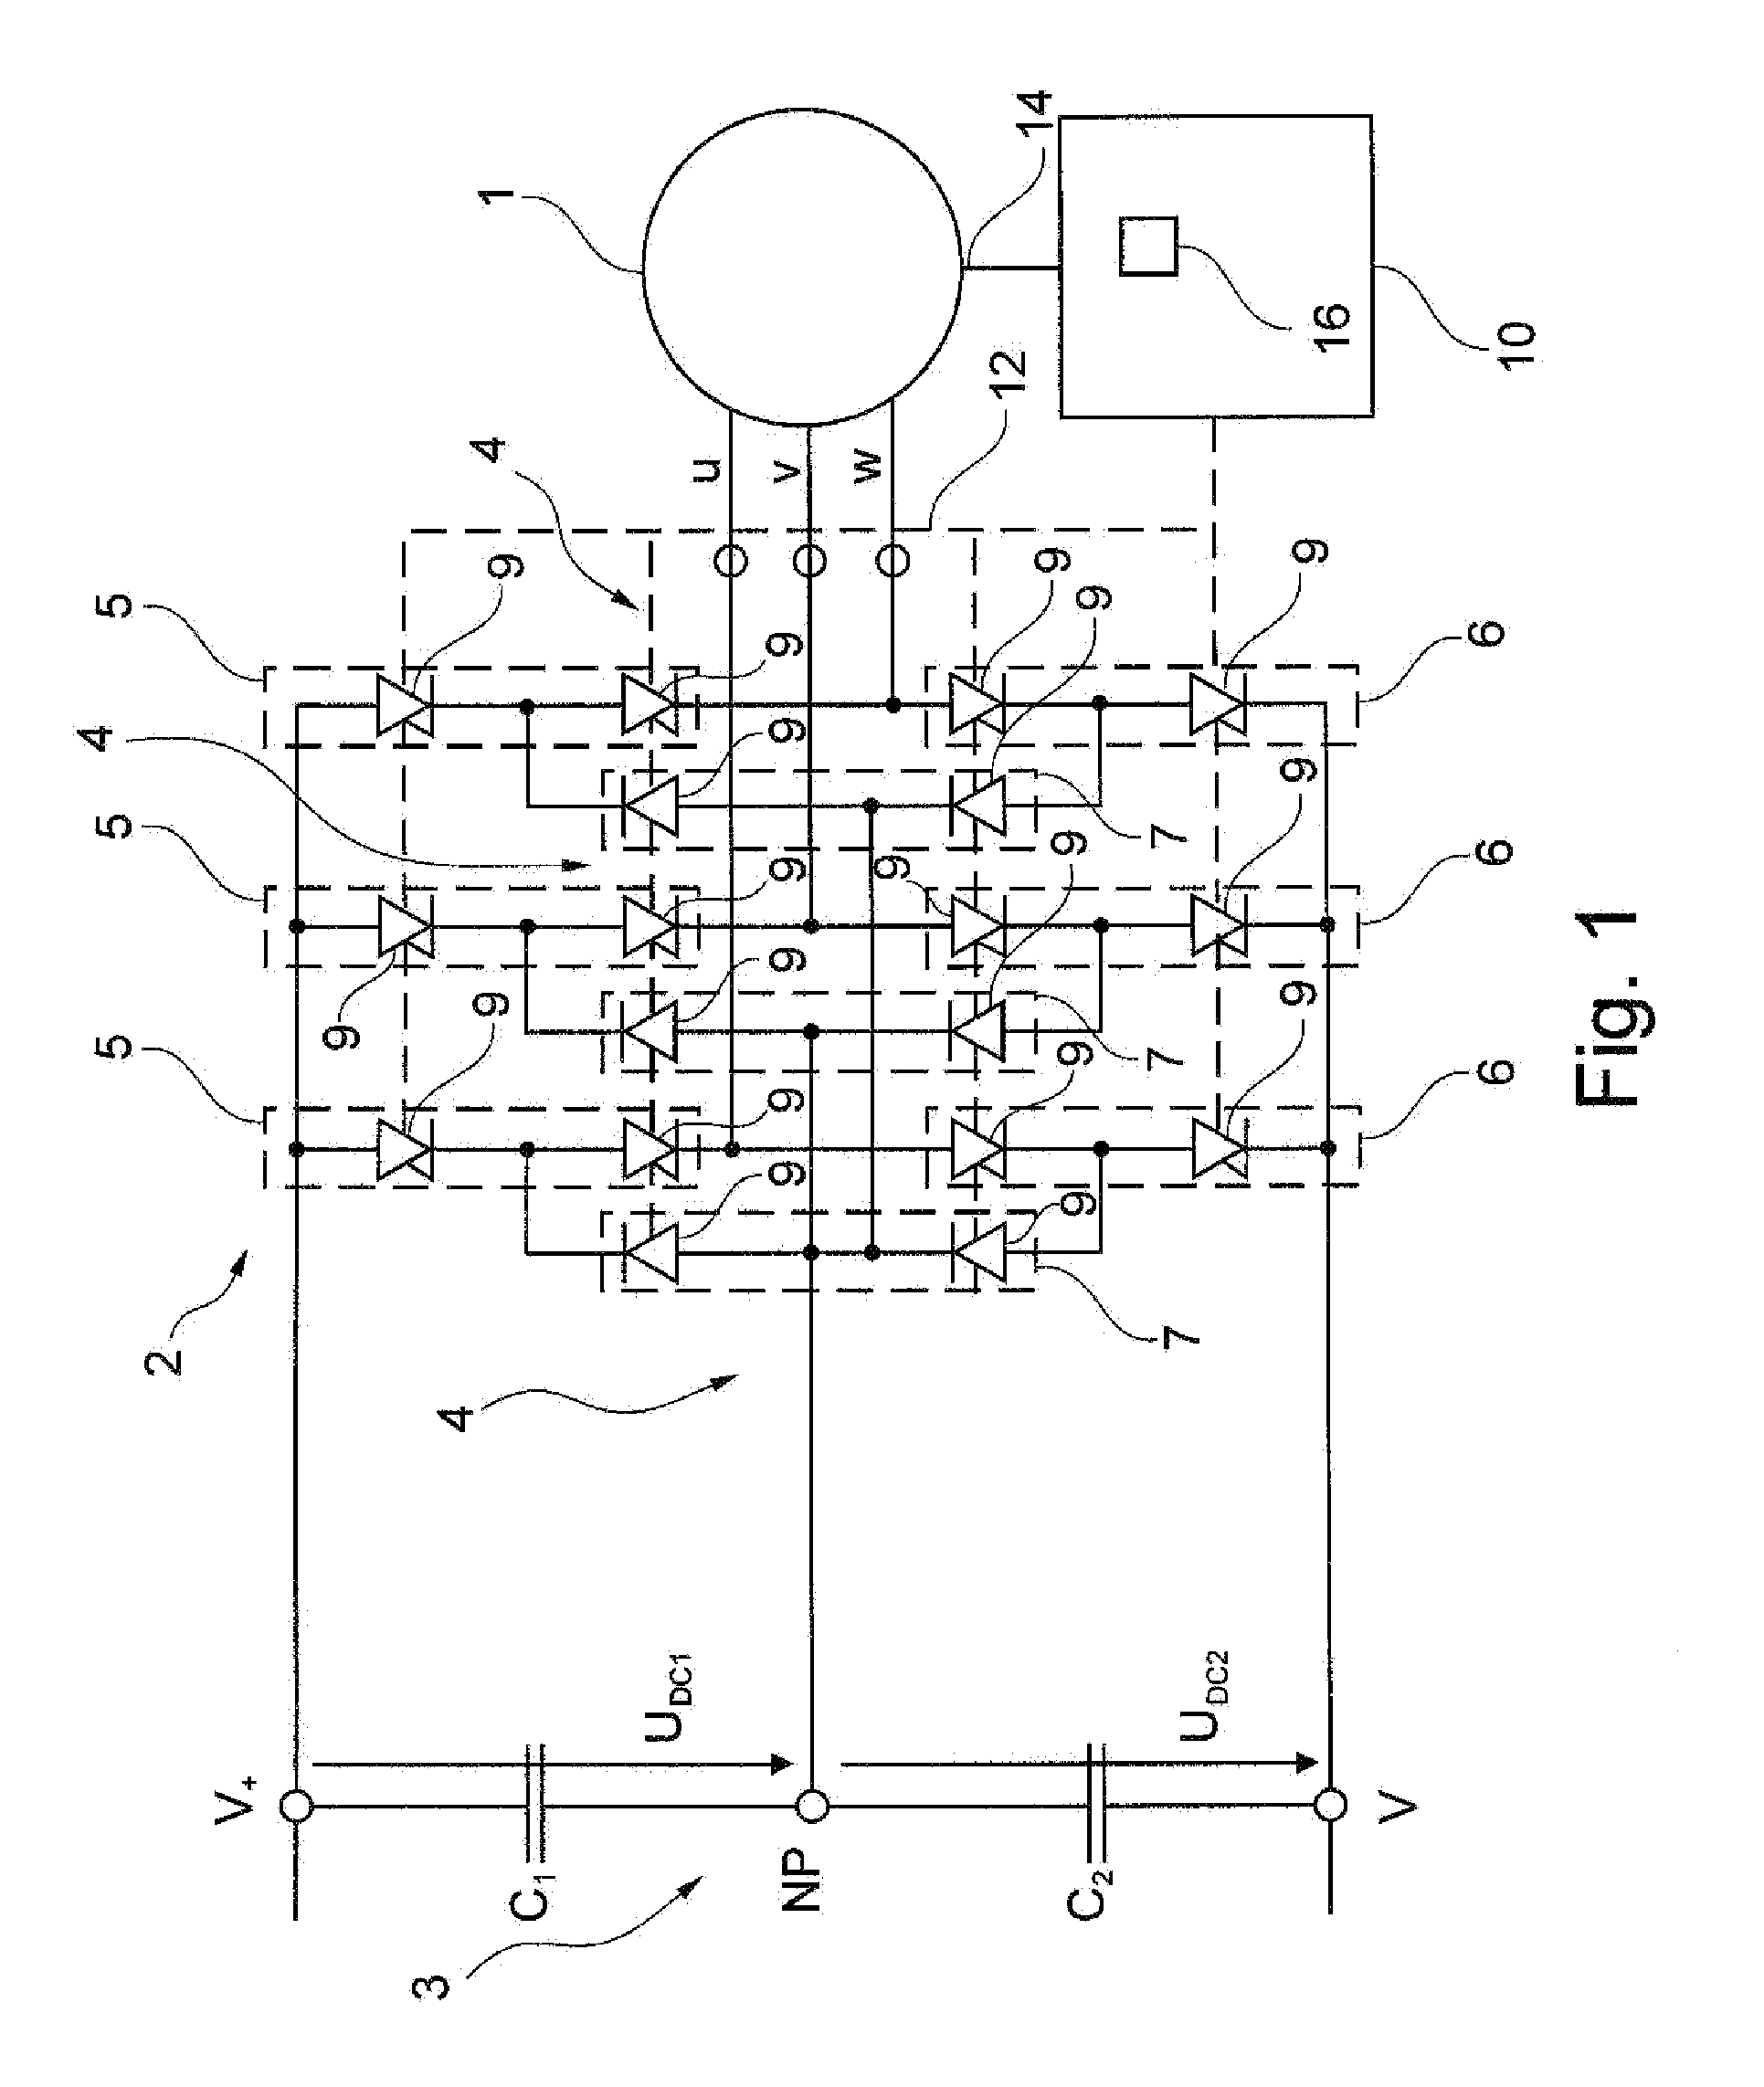 Controller for a rotating electrical machine